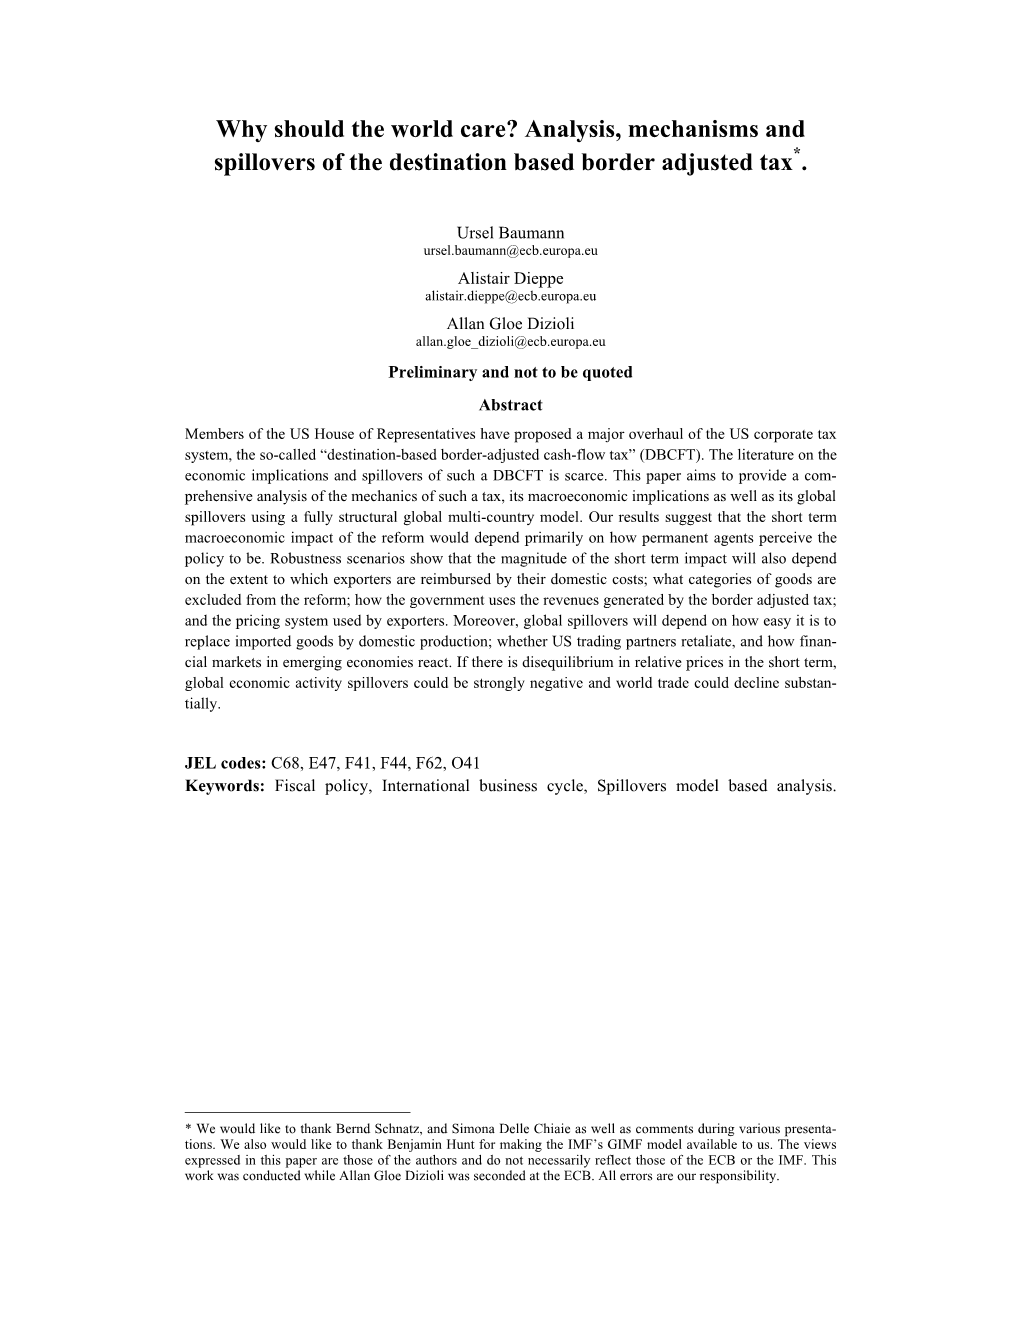 Why Should the World Care? Analysis, Mechanisms and Spillovers of the Destination Based Border Adjusted Tax